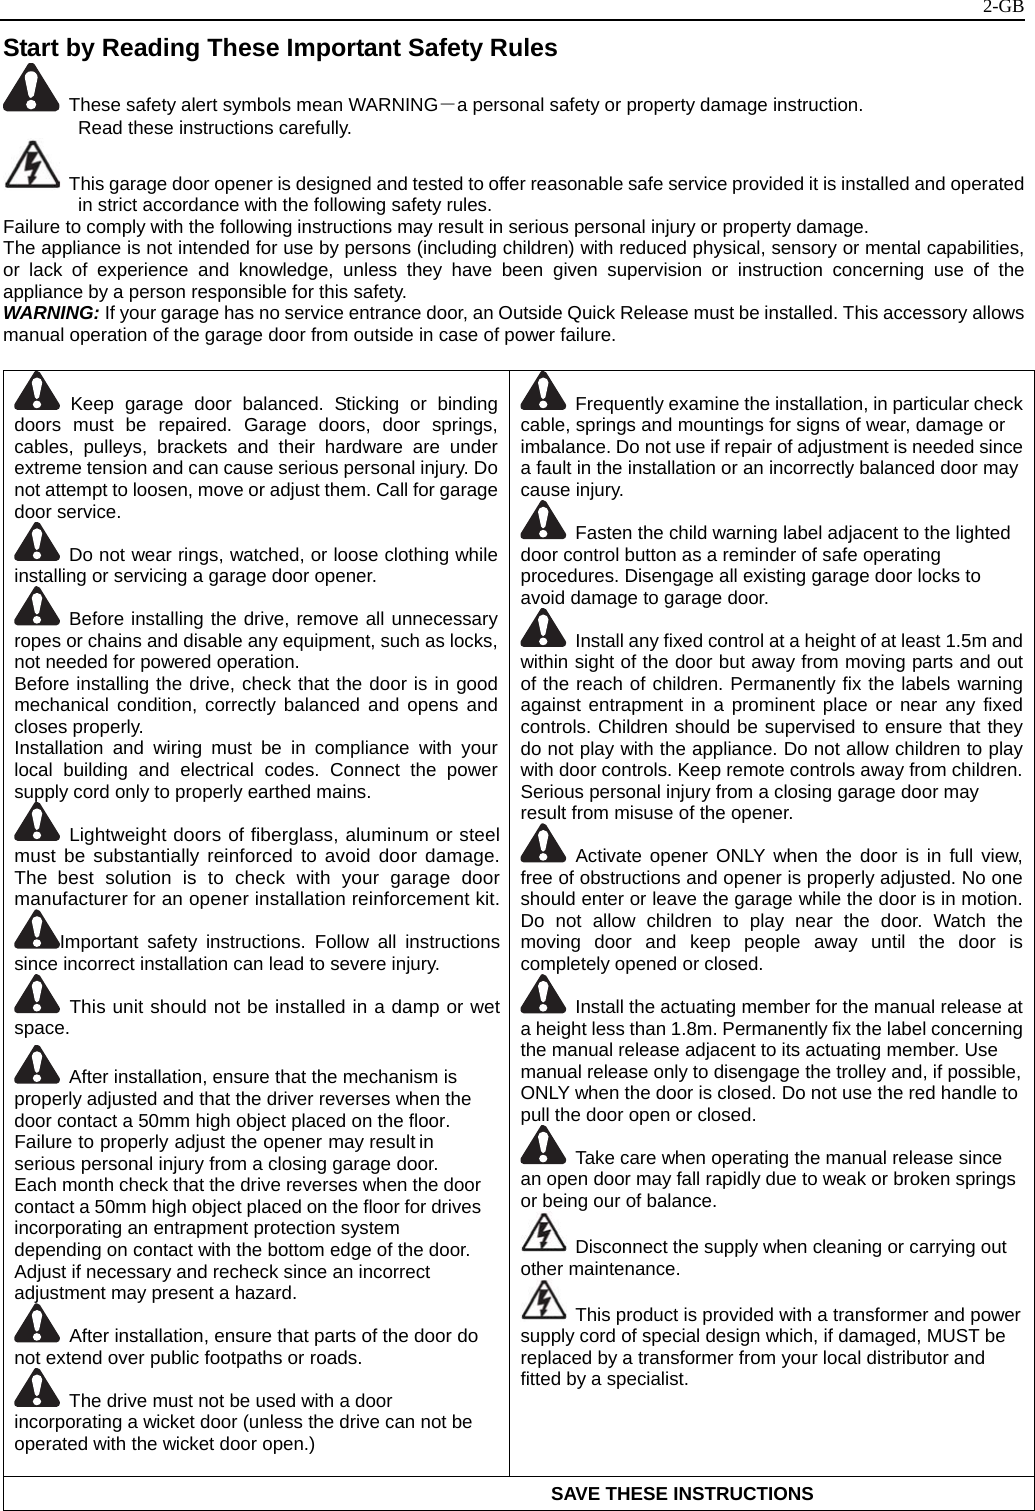   2-GBStart by Reading These Important Safety Rules                                         These safety alert symbols mean WARNING－a personal safety or property damage instruction. Read these instructions carefully.   This garage door opener is designed and tested to offer reasonable safe service provided it is installed and operated in strict accordance with the following safety rules. Failure to comply with the following instructions may result in serious personal injury or property damage. The appliance is not intended for use by persons (including children) with reduced physical, sensory or mental capabilities, or lack of experience and knowledge, unless they have been given supervision or instruction concerning use of the appliance by a person responsible for this safety. WARNING: If your garage has no service entrance door, an Outside Quick Release must be installed. This accessory allows manual operation of the garage door from outside in case of power failure.   Keep garage door balanced. Sticking or binding doors must be repaired. Garage doors, door springs, cables, pulleys, brackets and their hardware are under extreme tension and can cause serious personal injury. Do not attempt to loosen, move or adjust them. Call for garage door service.   Do not wear rings, watched, or loose clothing while installing or servicing a garage door opener.  Before installing the drive, remove all unnecessary ropes or chains and disable any equipment, such as locks, not needed for powered operation. Before installing the drive, check that the door is in good mechanical condition, correctly balanced and opens and closes properly. Installation and wiring must be in compliance with your local building and electrical codes. Connect the power supply cord only to properly earthed mains.  Lightweight doors of fiberglass, aluminum or steel must be substantially reinforced to avoid door damage. The best solution is to check with your garage door manufacturer for an opener installation reinforcement kit.Important safety instructions. Follow all instructions since incorrect installation can lead to severe injury.  This unit should not be installed in a damp or wet space.   After installation, ensure that the mechanism is properly adjusted and that the driver reverses when the door contact a 50mm high object placed on the floor. Failure to properly adjust the opener may result in serious personal injury from a closing garage door. Each month check that the drive reverses when the door contact a 50mm high object placed on the floor for drives incorporating an entrapment protection system depending on contact with the bottom edge of the door. Adjust if necessary and recheck since an incorrect adjustment may present a hazard.   After installation, ensure that parts of the door do not extend over public footpaths or roads.   The drive must not be used with a door incorporating a wicket door (unless the drive can not be operated with the wicket door open.)    Frequently examine the installation, in particular check cable, springs and mountings for signs of wear, damage or imbalance. Do not use if repair of adjustment is needed since a fault in the installation or an incorrectly balanced door may cause injury.   Fasten the child warning label adjacent to the lighted door control button as a reminder of safe operating procedures. Disengage all existing garage door locks to avoid damage to garage door.     Install any fixed control at a height of at least 1.5m and within sight of the door but away from moving parts and out of the reach of children. Permanently fix the labels warning against entrapment in a prominent place or near any fixed controls. Children should be supervised to ensure that they do not play with the appliance. Do not allow children to play with door controls. Keep remote controls away from children.Serious personal injury from a closing garage door may result from misuse of the opener.  Activate opener ONLY when the door is in full view, free of obstructions and opener is properly adjusted. No one should enter or leave the garage while the door is in motion. Do not allow children to play near the door. Watch the moving door and keep people away until the door is completely opened or closed.   Install the actuating member for the manual release at a height less than 1.8m. Permanently fix the label concerning the manual release adjacent to its actuating member. Use manual release only to disengage the trolley and, if possible, ONLY when the door is closed. Do not use the red handle to pull the door open or closed.     Take care when operating the manual release since an open door may fall rapidly due to weak or broken springs or being our of balance.   Disconnect the supply when cleaning or carrying out other maintenance.   This product is provided with a transformer and power supply cord of special design which, if damaged, MUST be replaced by a transformer from your local distributor and fitted by a specialist.                                                          SAVE THESE INSTRUCTIONS 